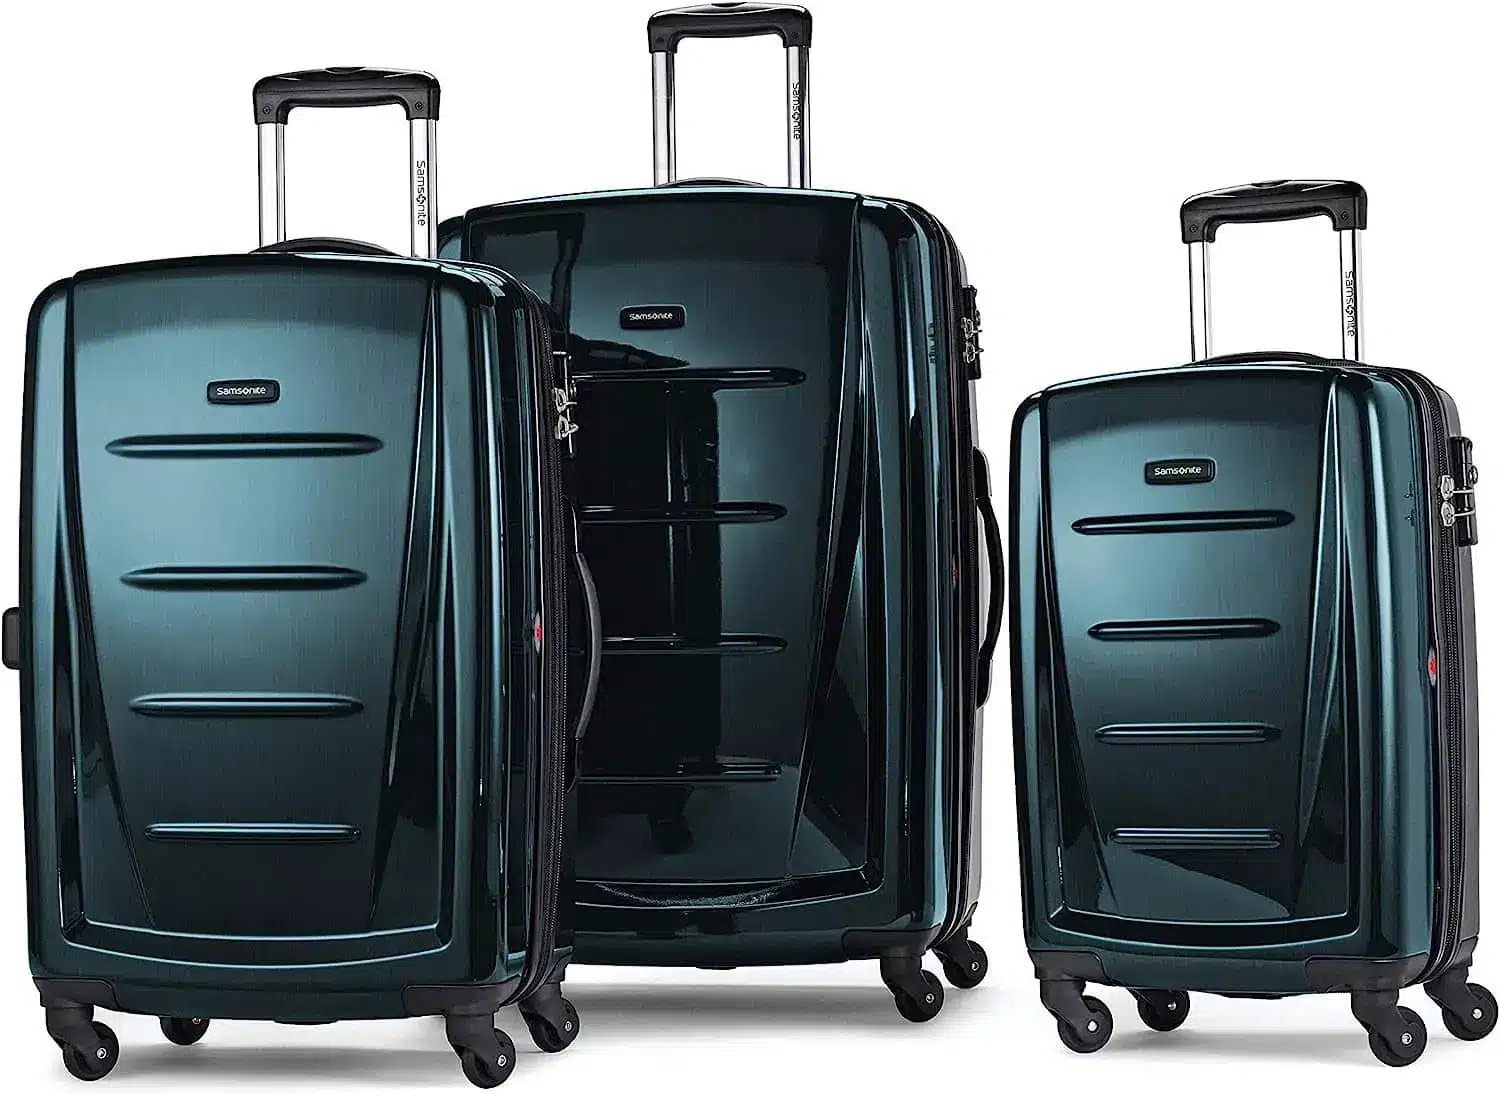 A Full Guide To Samsonite Winfield 2 Hardside Luggage